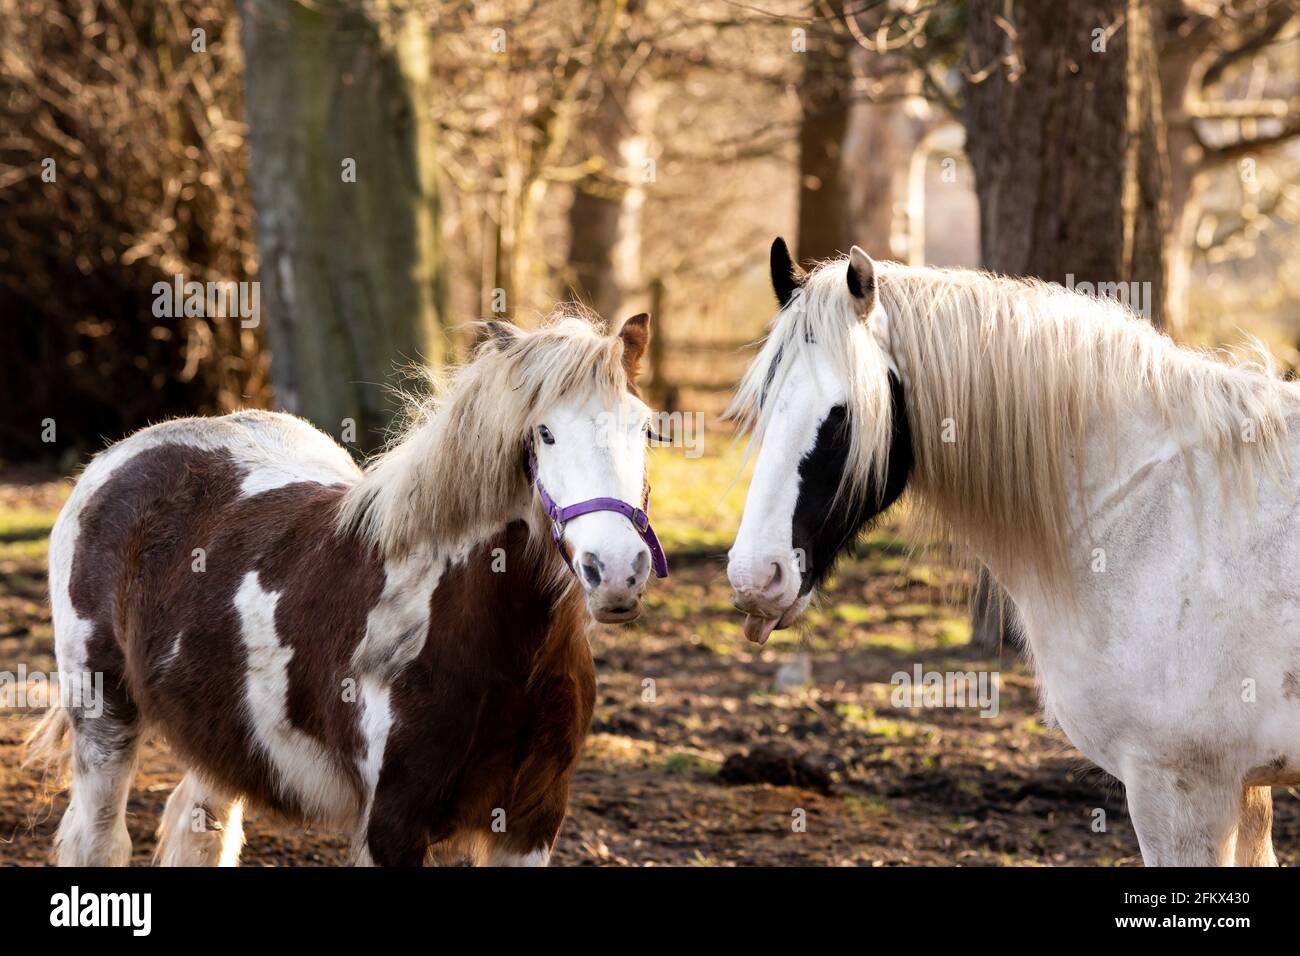 Two horses pulling funny faces, one with tongue out Stock Photo